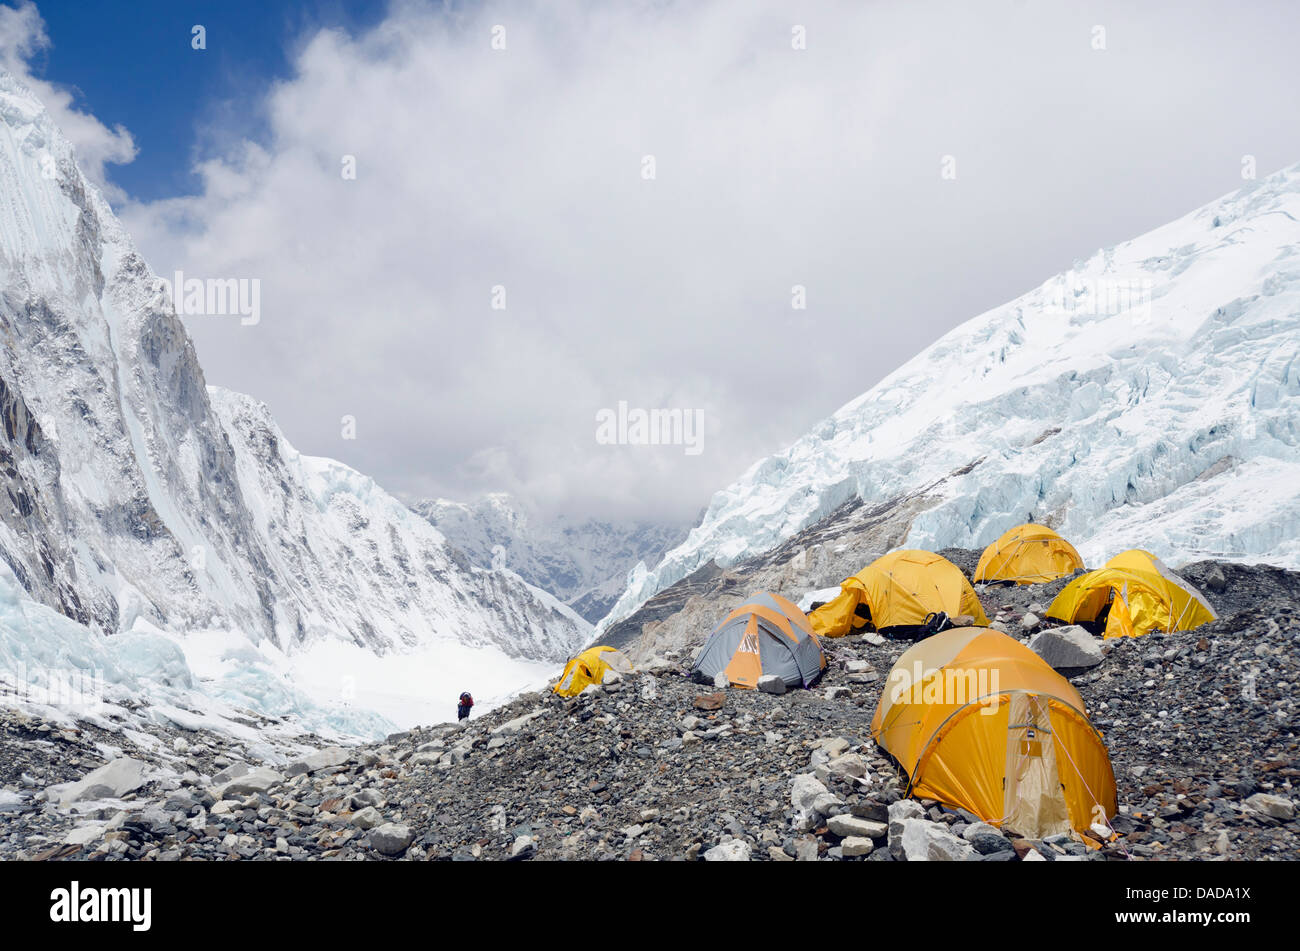 Tents At Camp 2 At 6500m On Mount Everest Solu Khumbu Everest Stock Photo Alamy